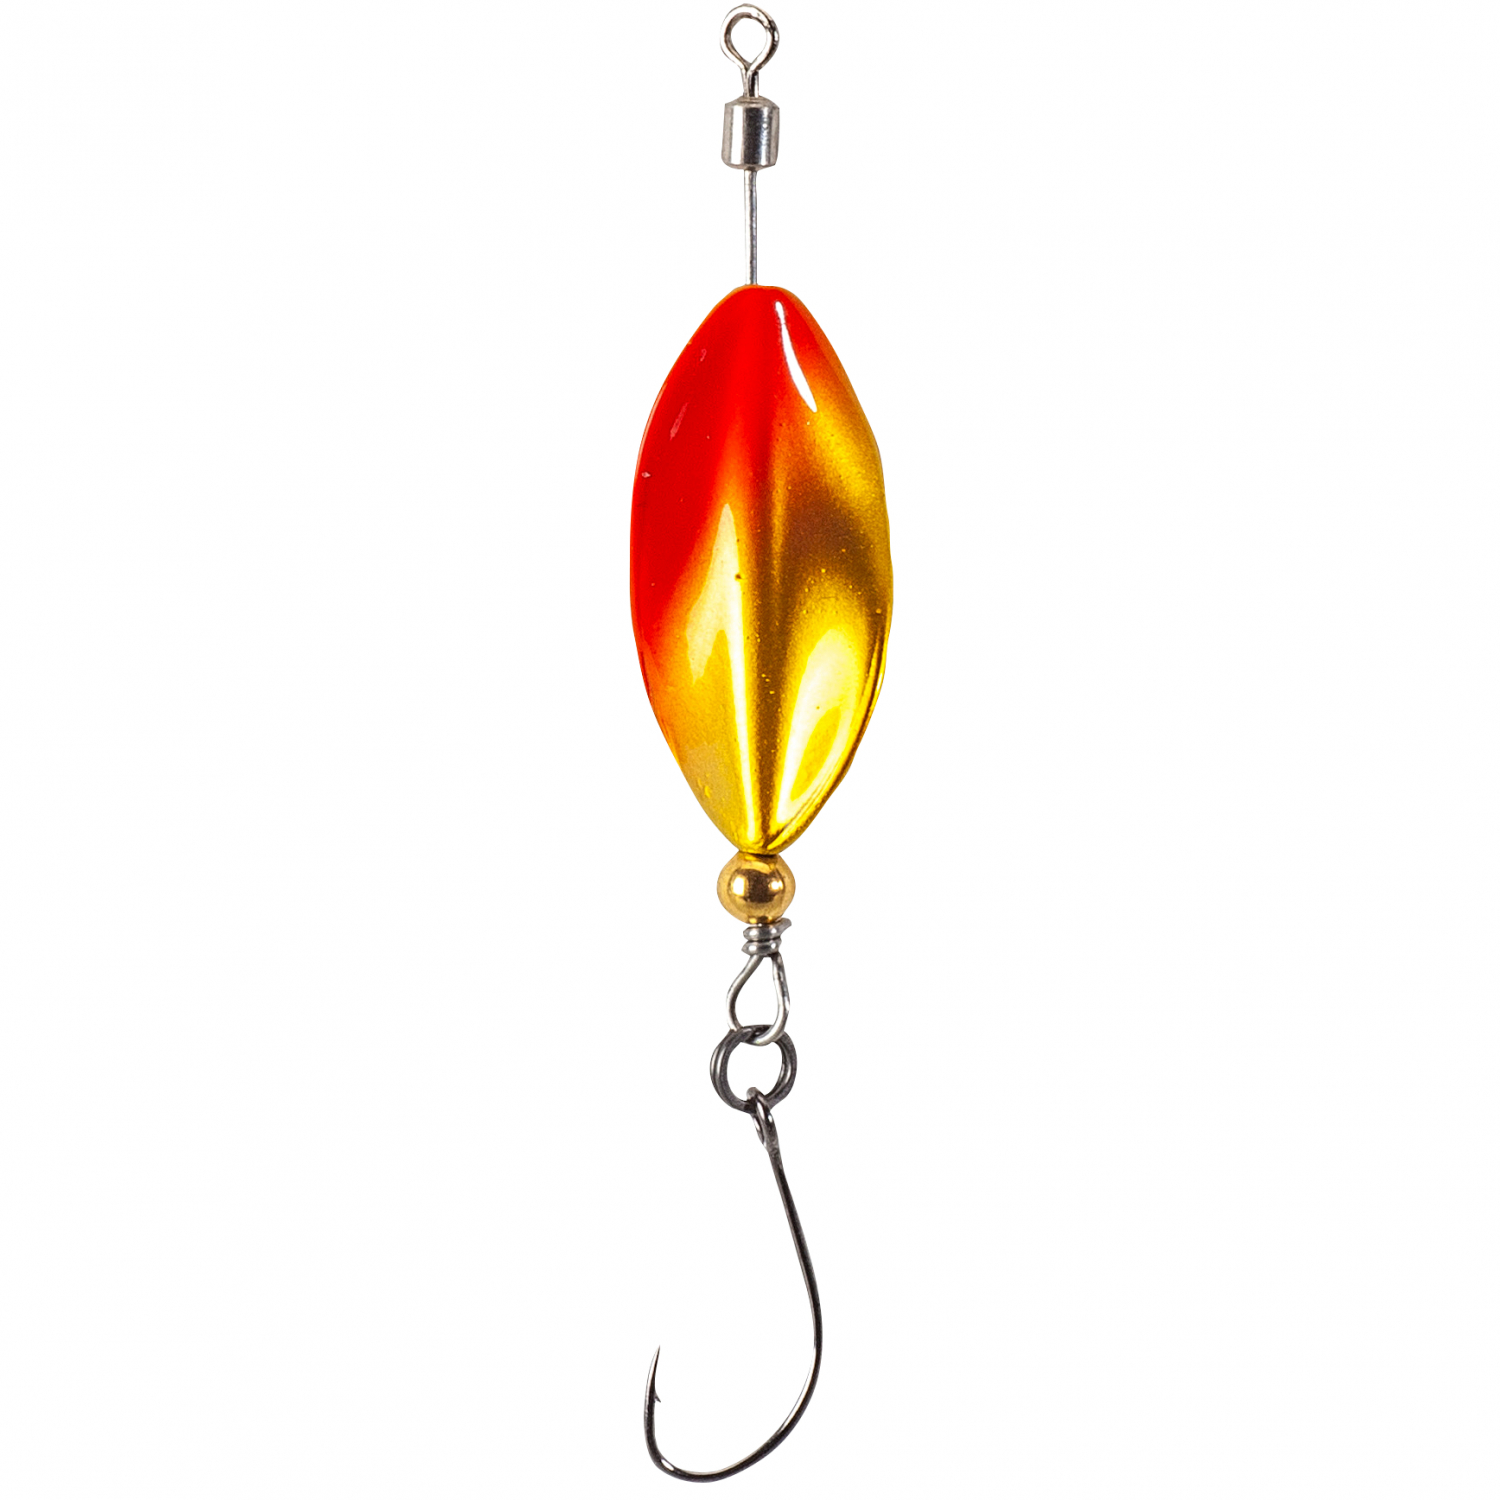 Iron Trout Troutbiat Swirly Series Leaf Lure (RG) 